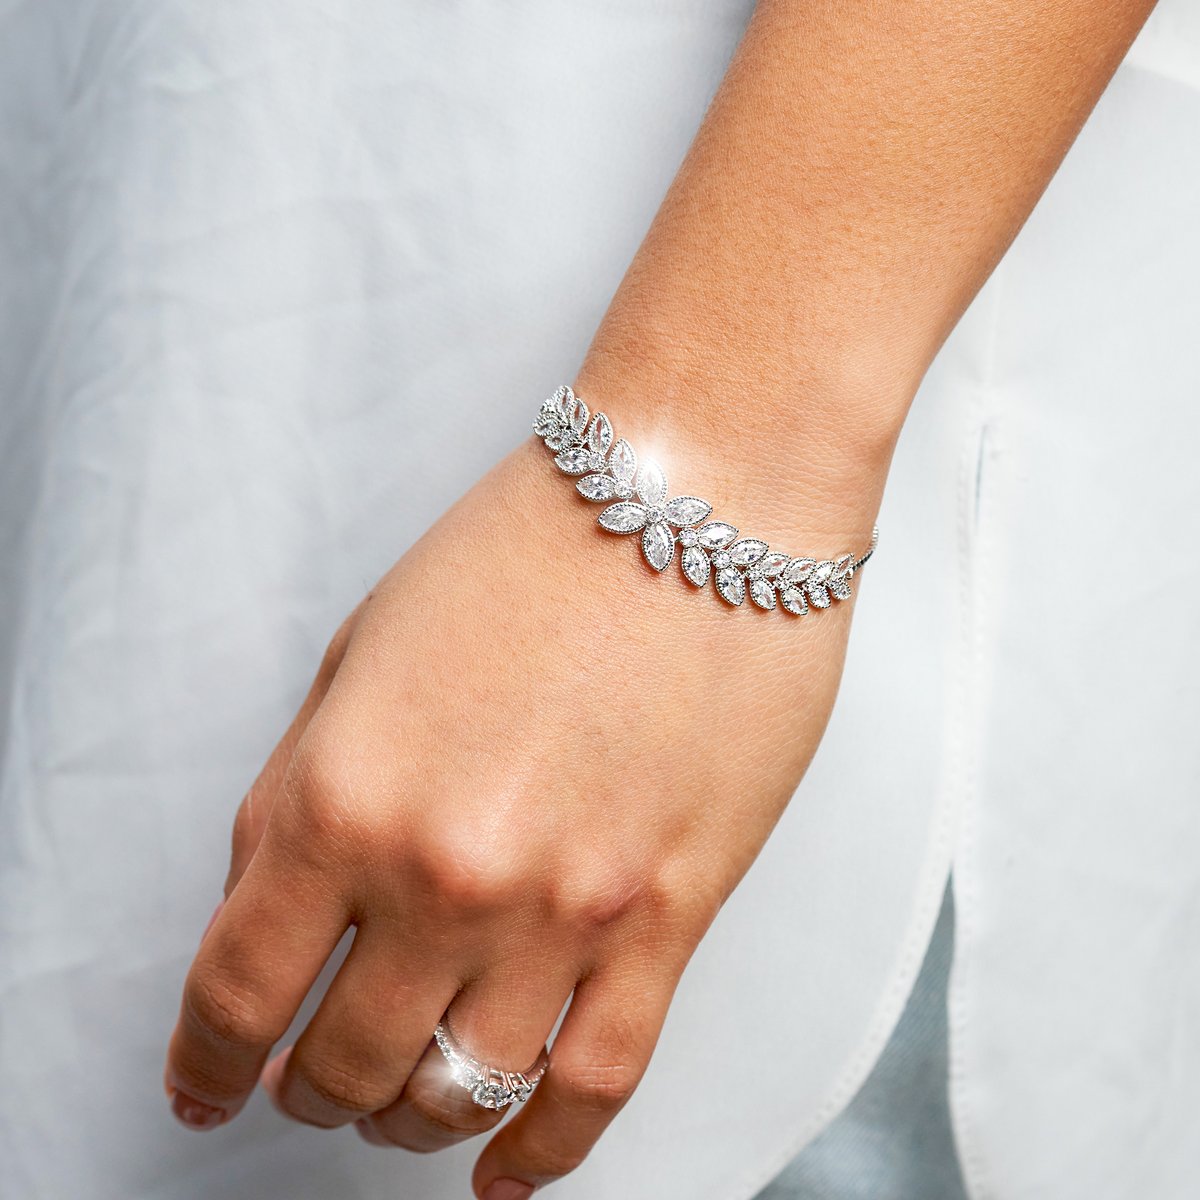 Do you want to shine all day long? We have the right pieces for you 💎💙 Shop now: bit.ly/37SIgj3 #womenbracelets #weddingbracelets #lovejewelry #silverjewelry #sterlingsilver #cubiczirconia #fashion #glamorous #besttohave #besttohavejewelry #gift #present